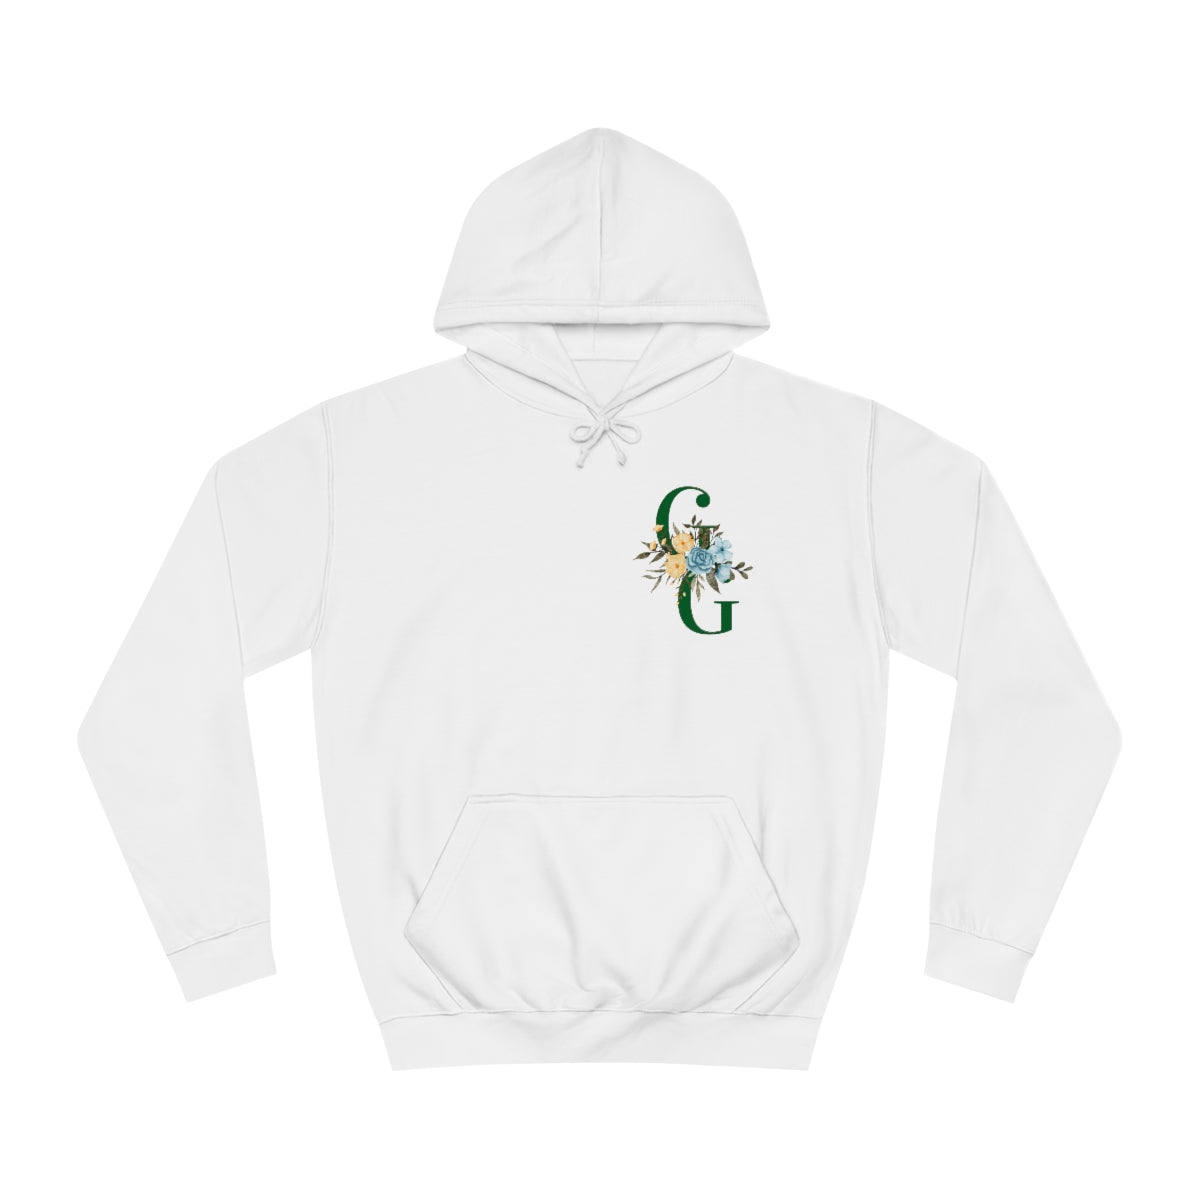 GG Floral Hoodie - White/Green